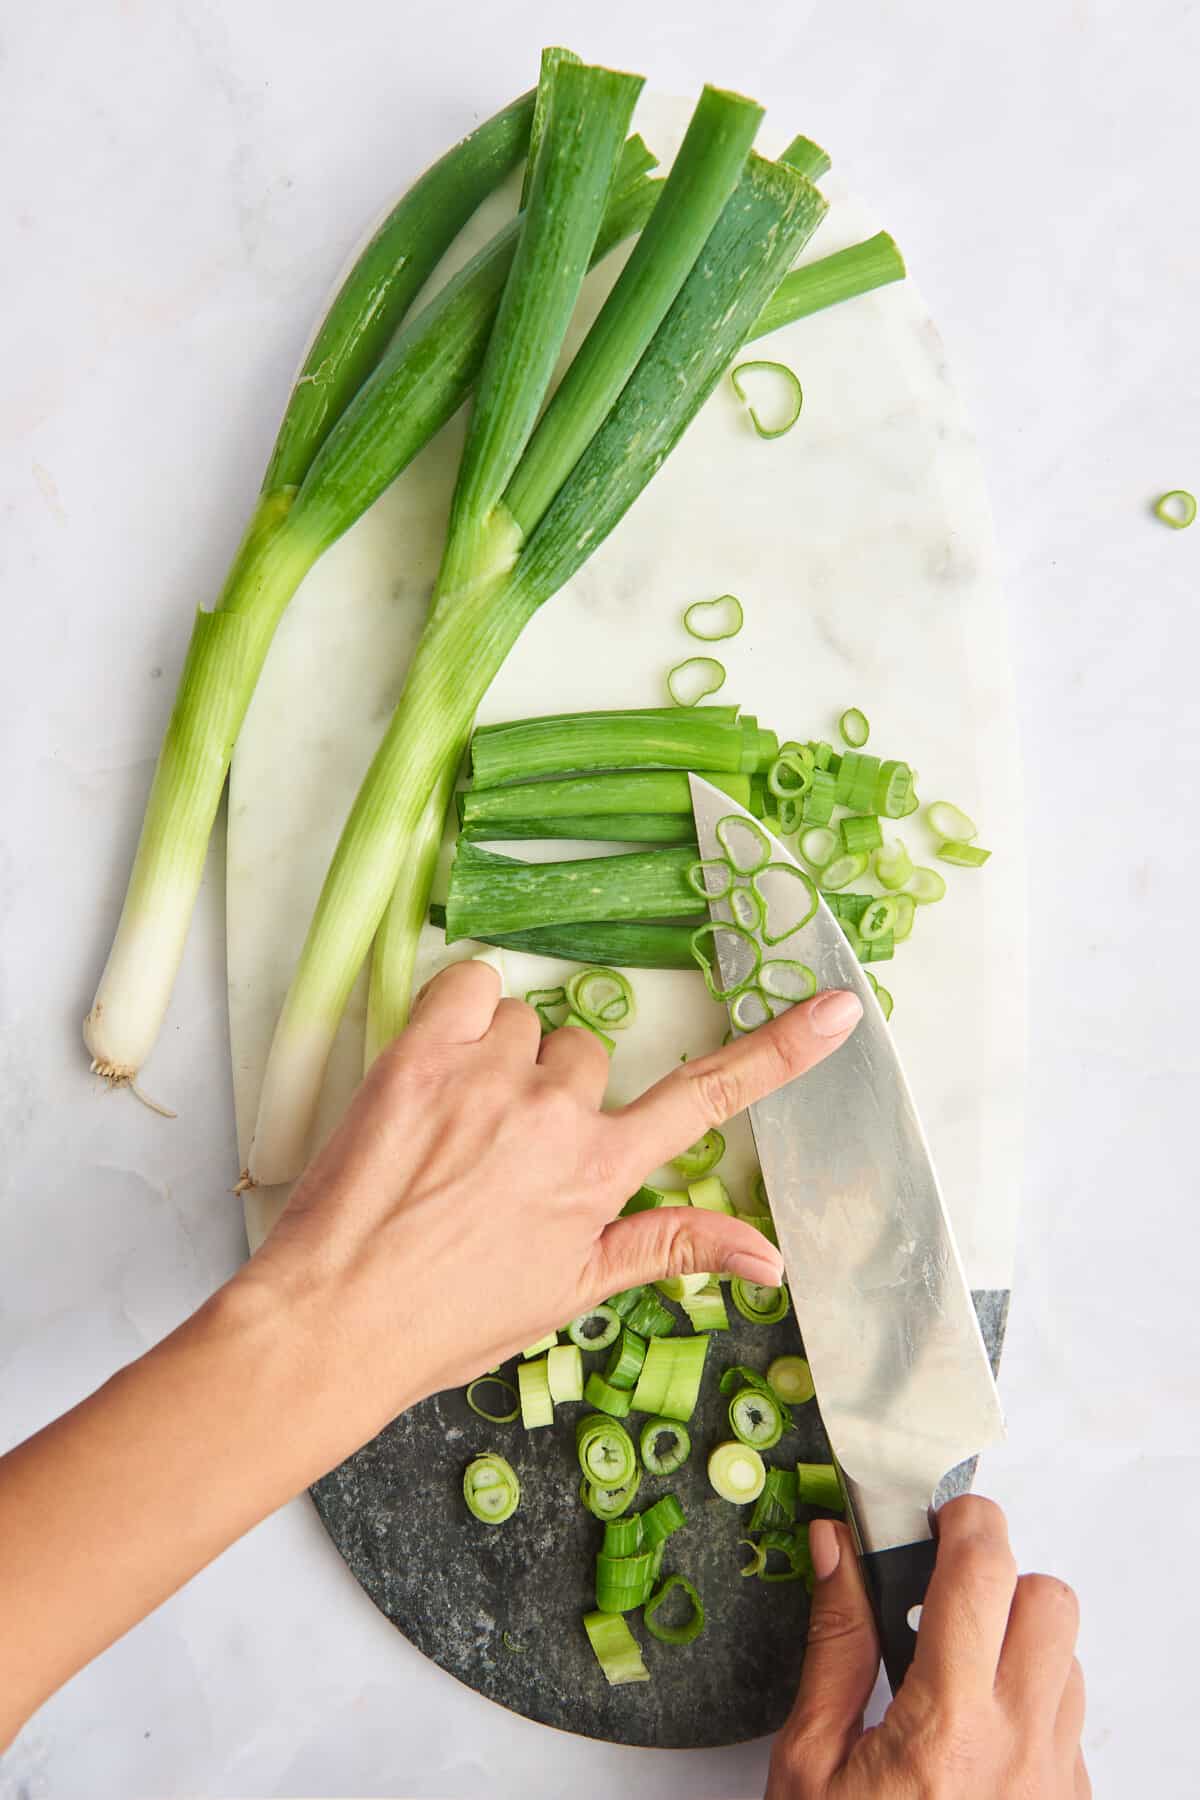 A knife with chopped scallions over a cutting board with whole and chopped green onions. 